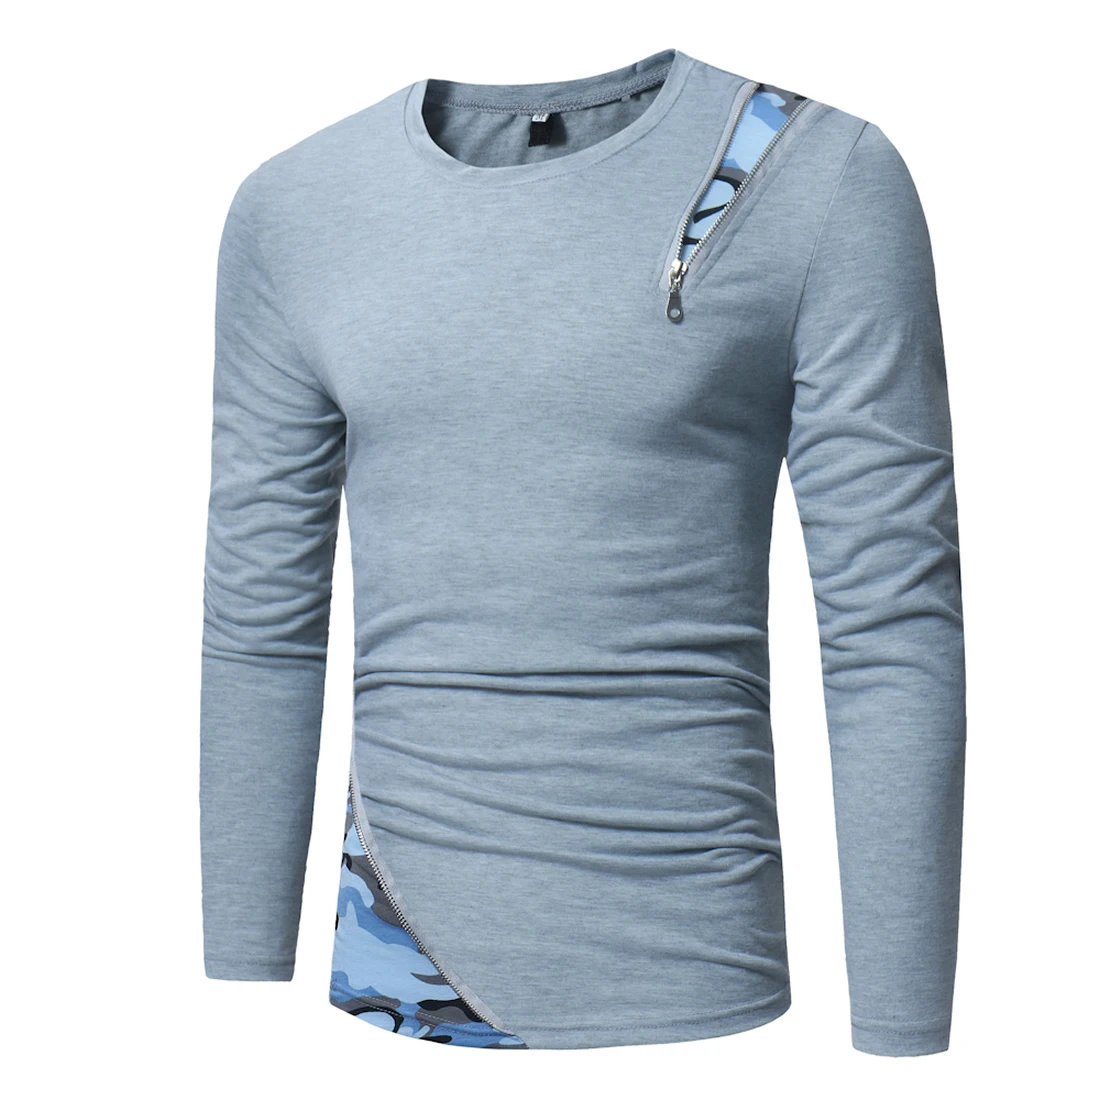 Mixed Fabric Cotton Men Long Sleeve T-shirt Patchwork Solid - Buy T ...